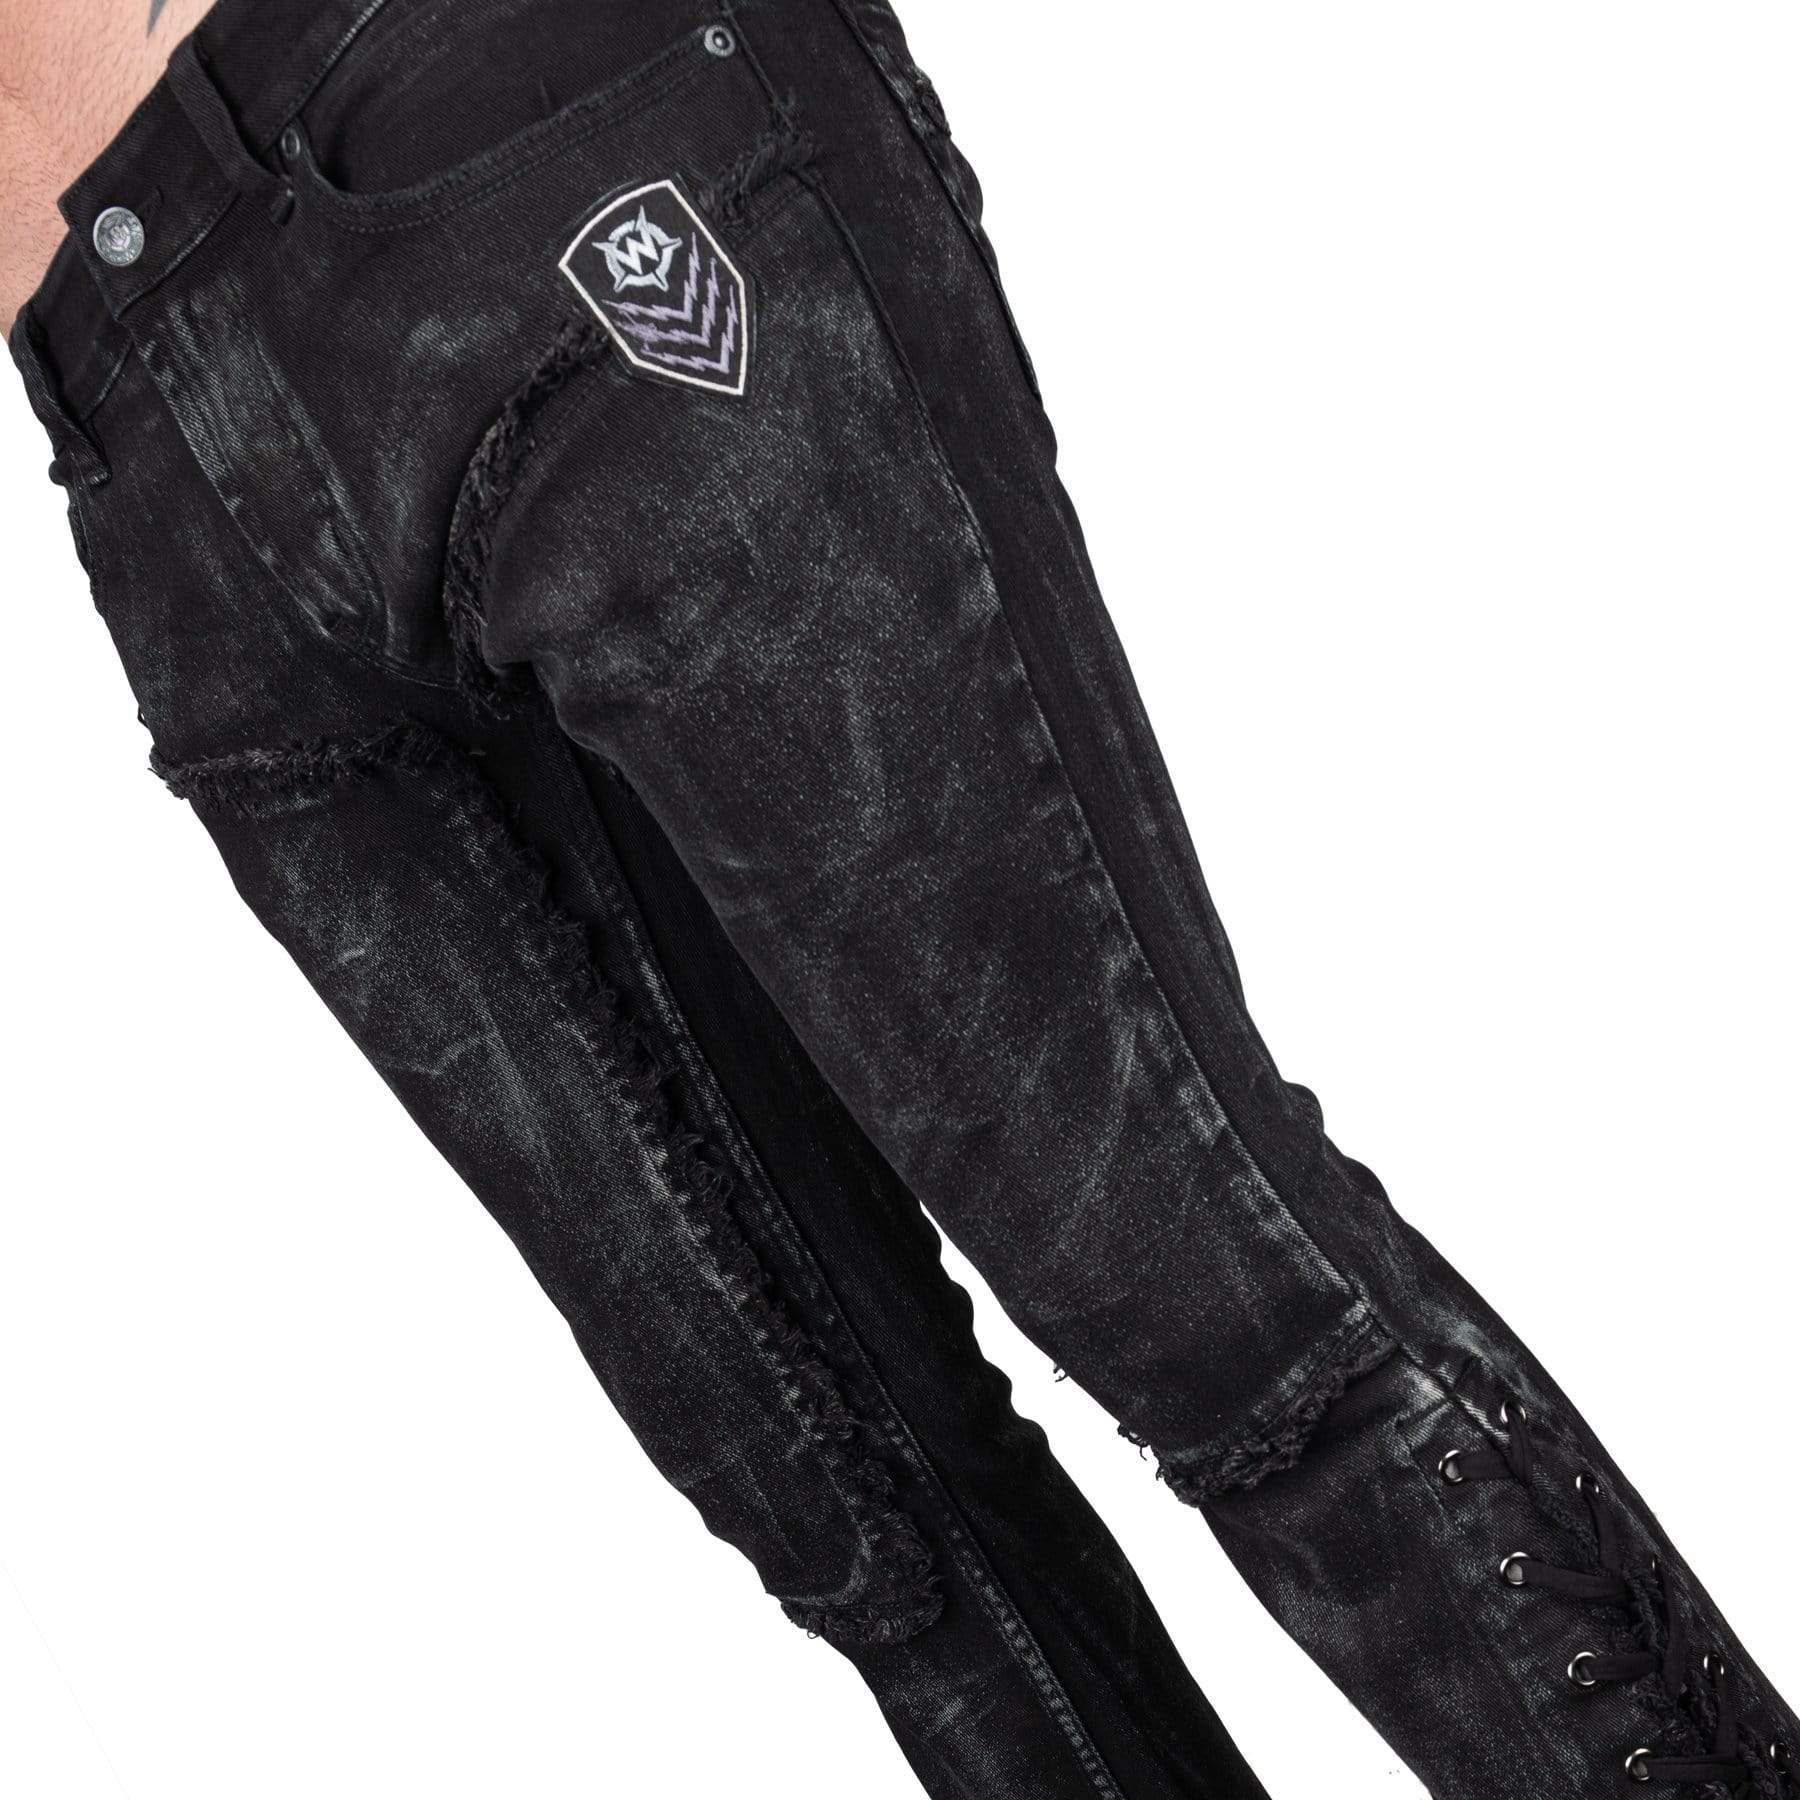 All Access Collection Pants Cutlass Jeans